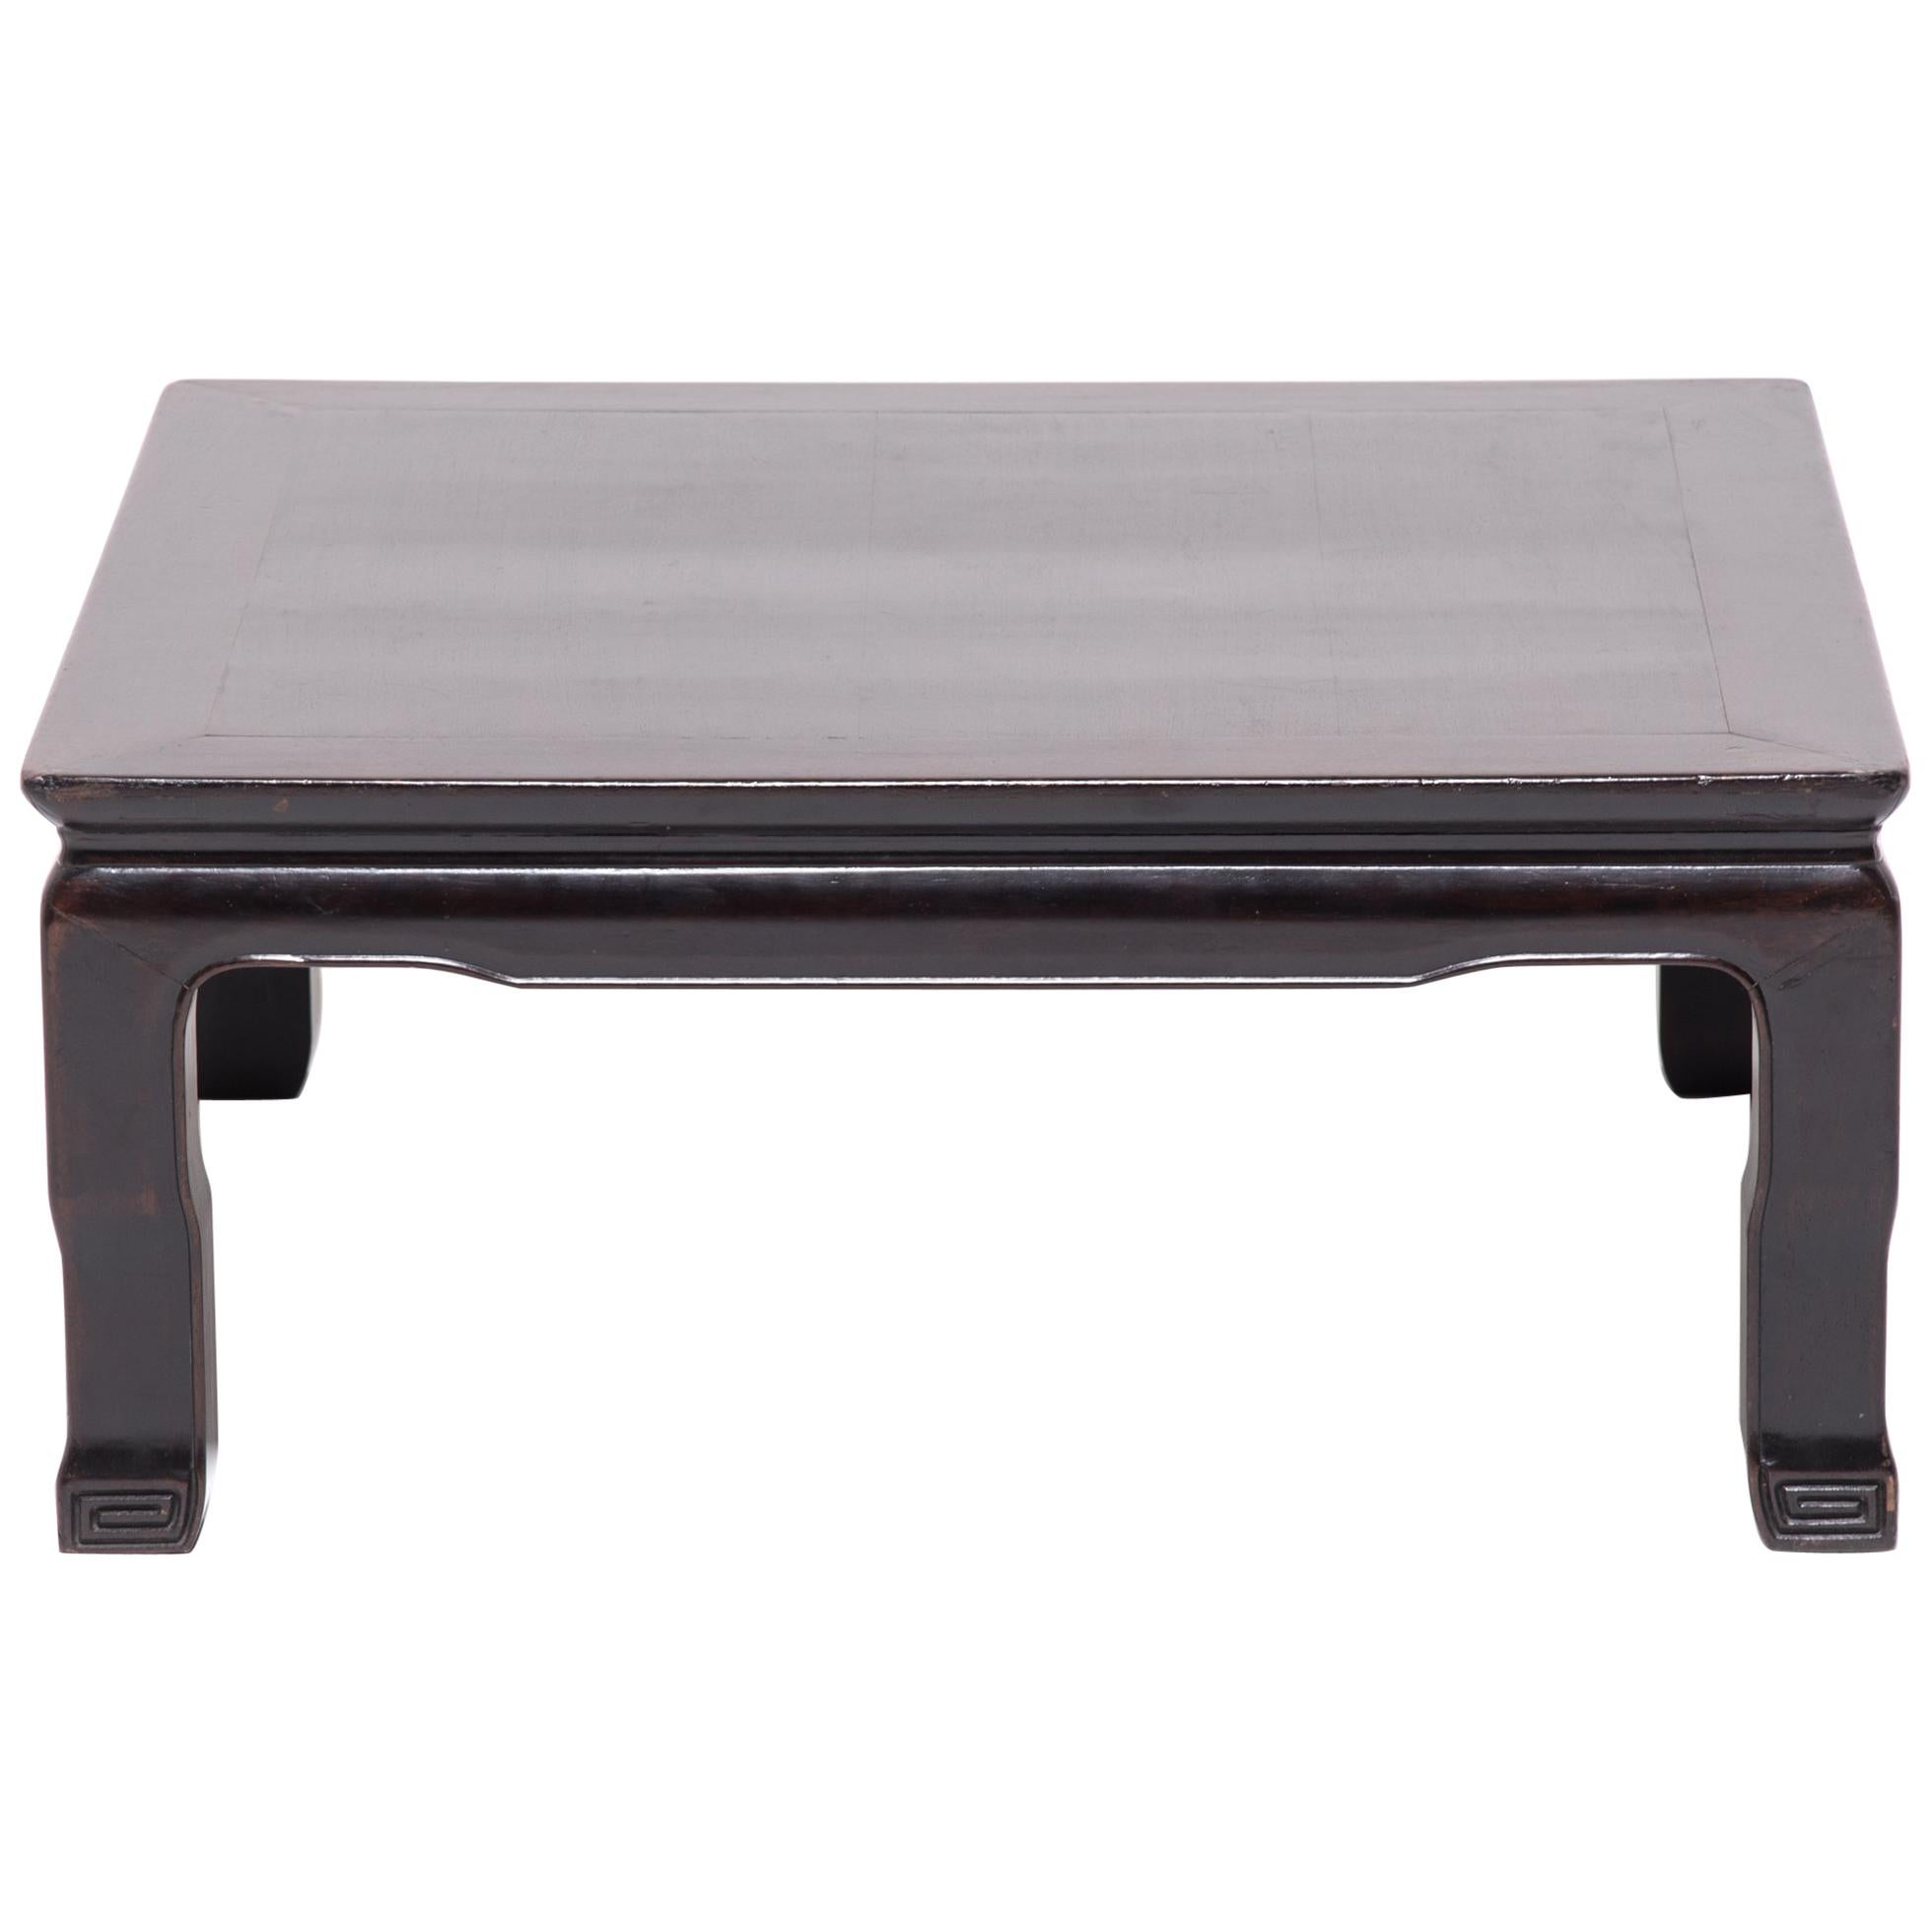 Chinese Low Square Table